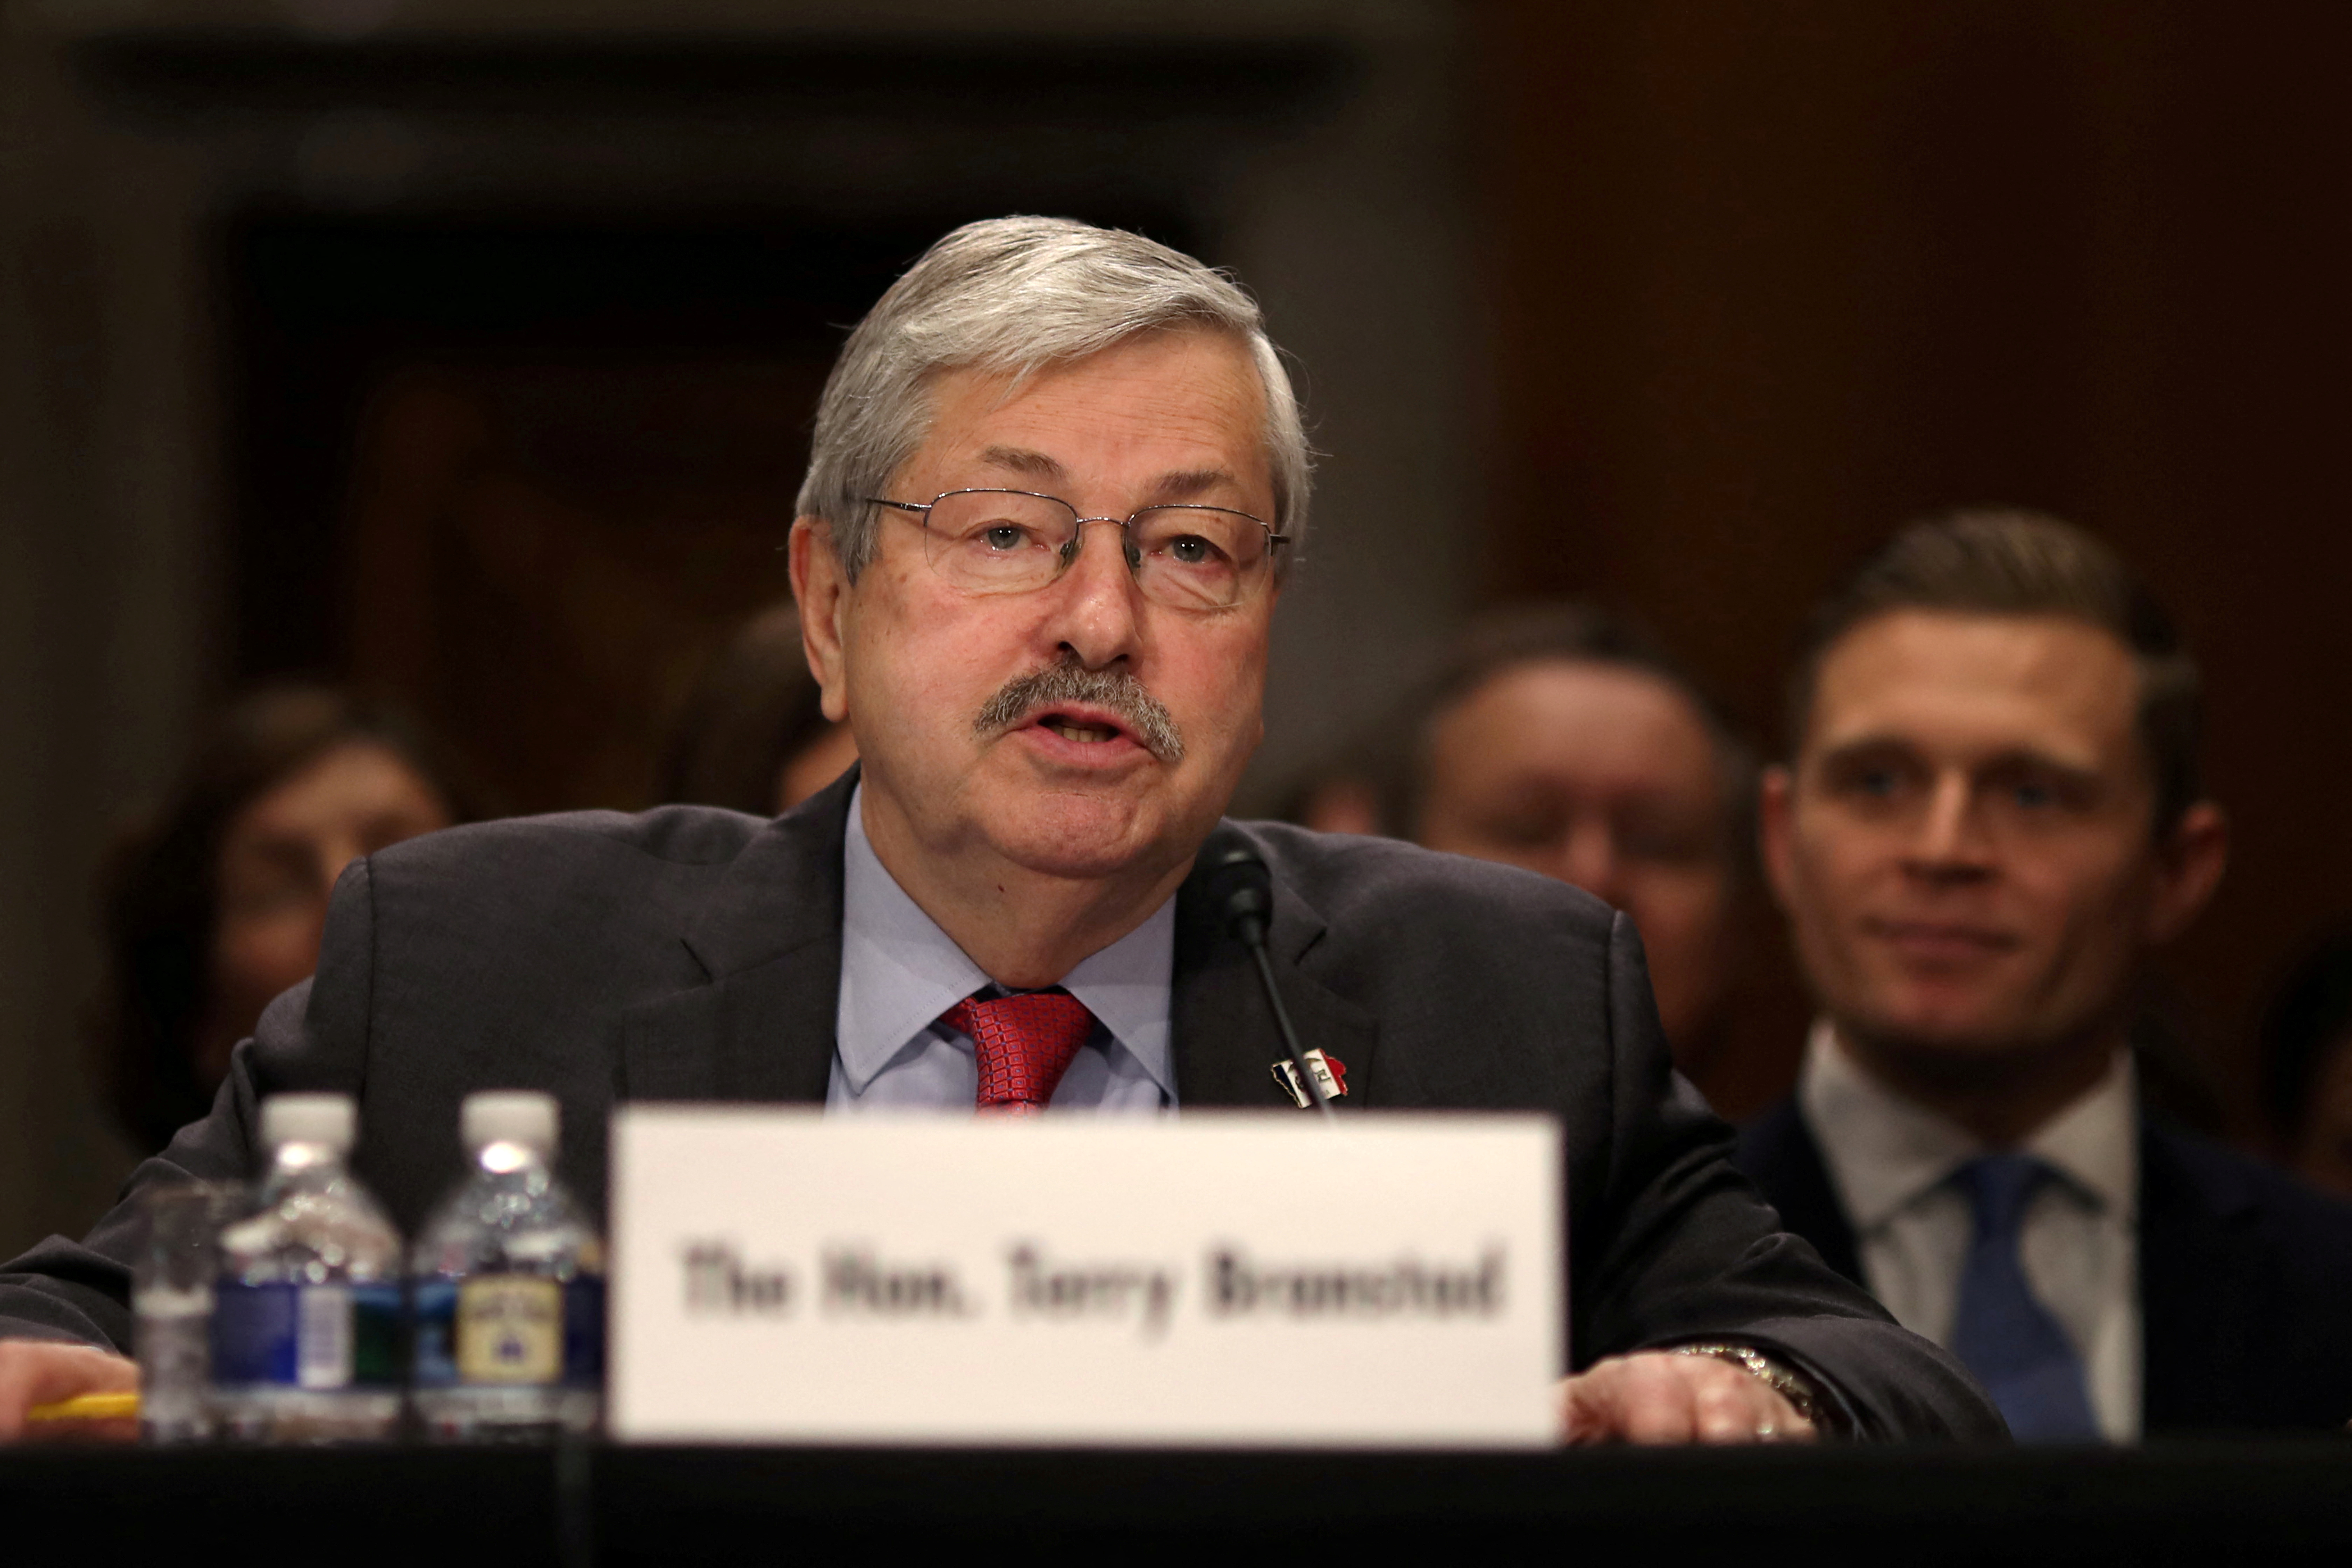 Iowa Governor Terry Branstad testifies before a Senate Foreign Relations Committee confirmation hearing on his nomination to be U.S. ambassador to China at Capitol Hill in Washington D.C.